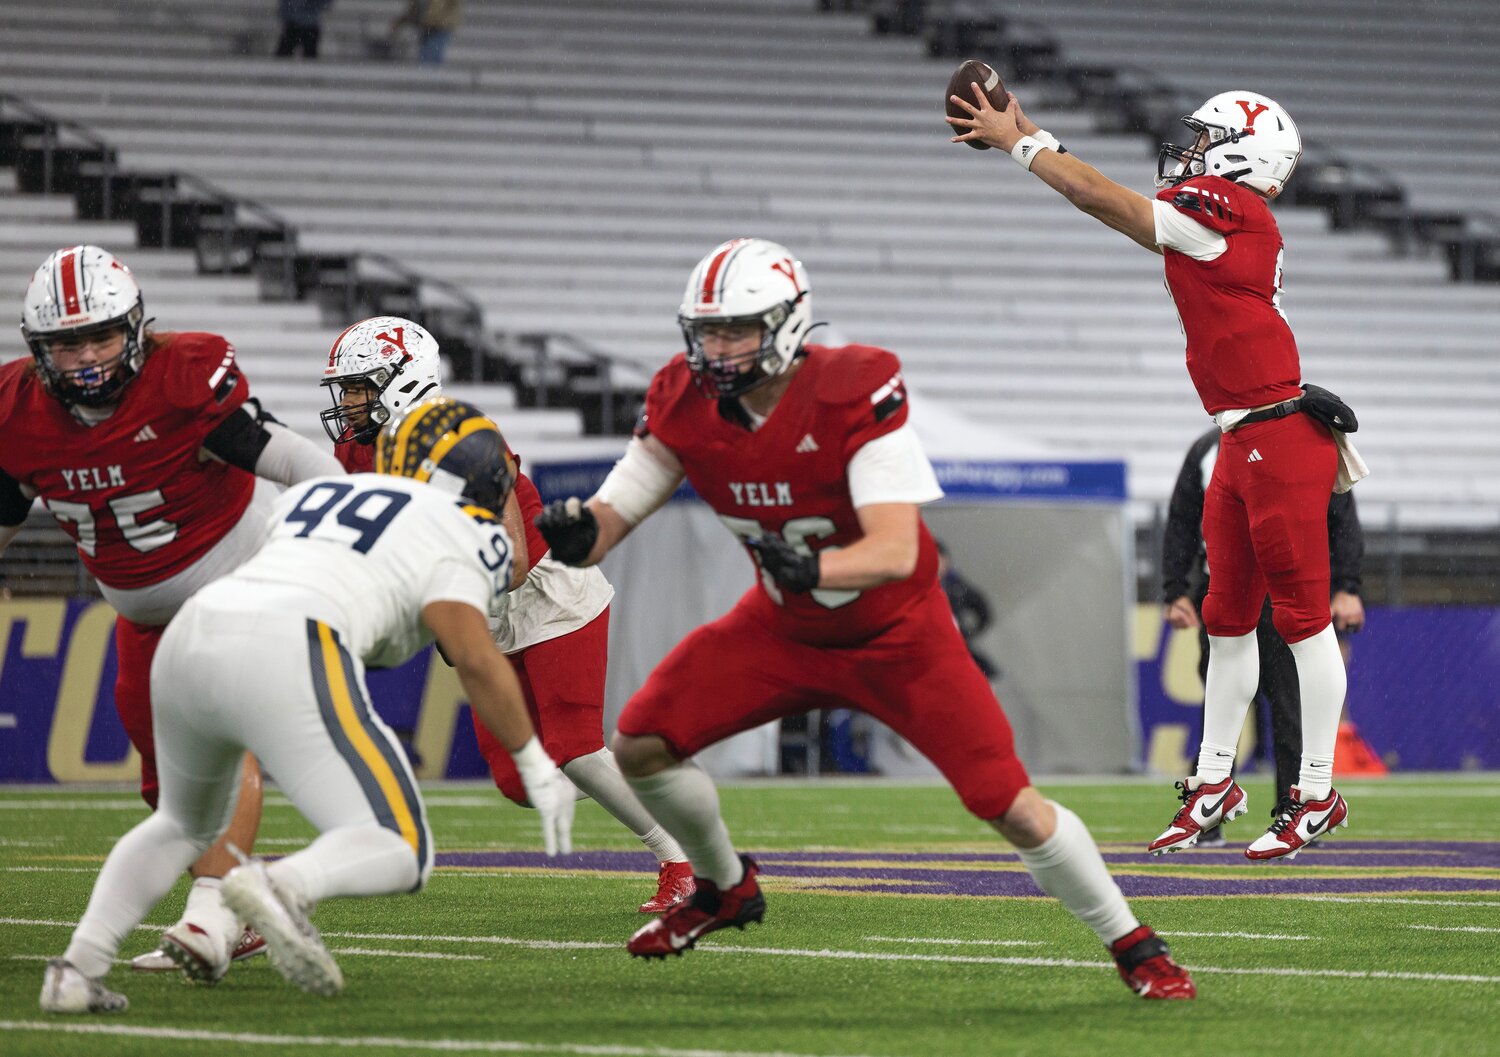 Yelm quarterback Damian Aalona leaps for the football during the 3A state championship game at Husky Stadium on Friday, Dec. 1.